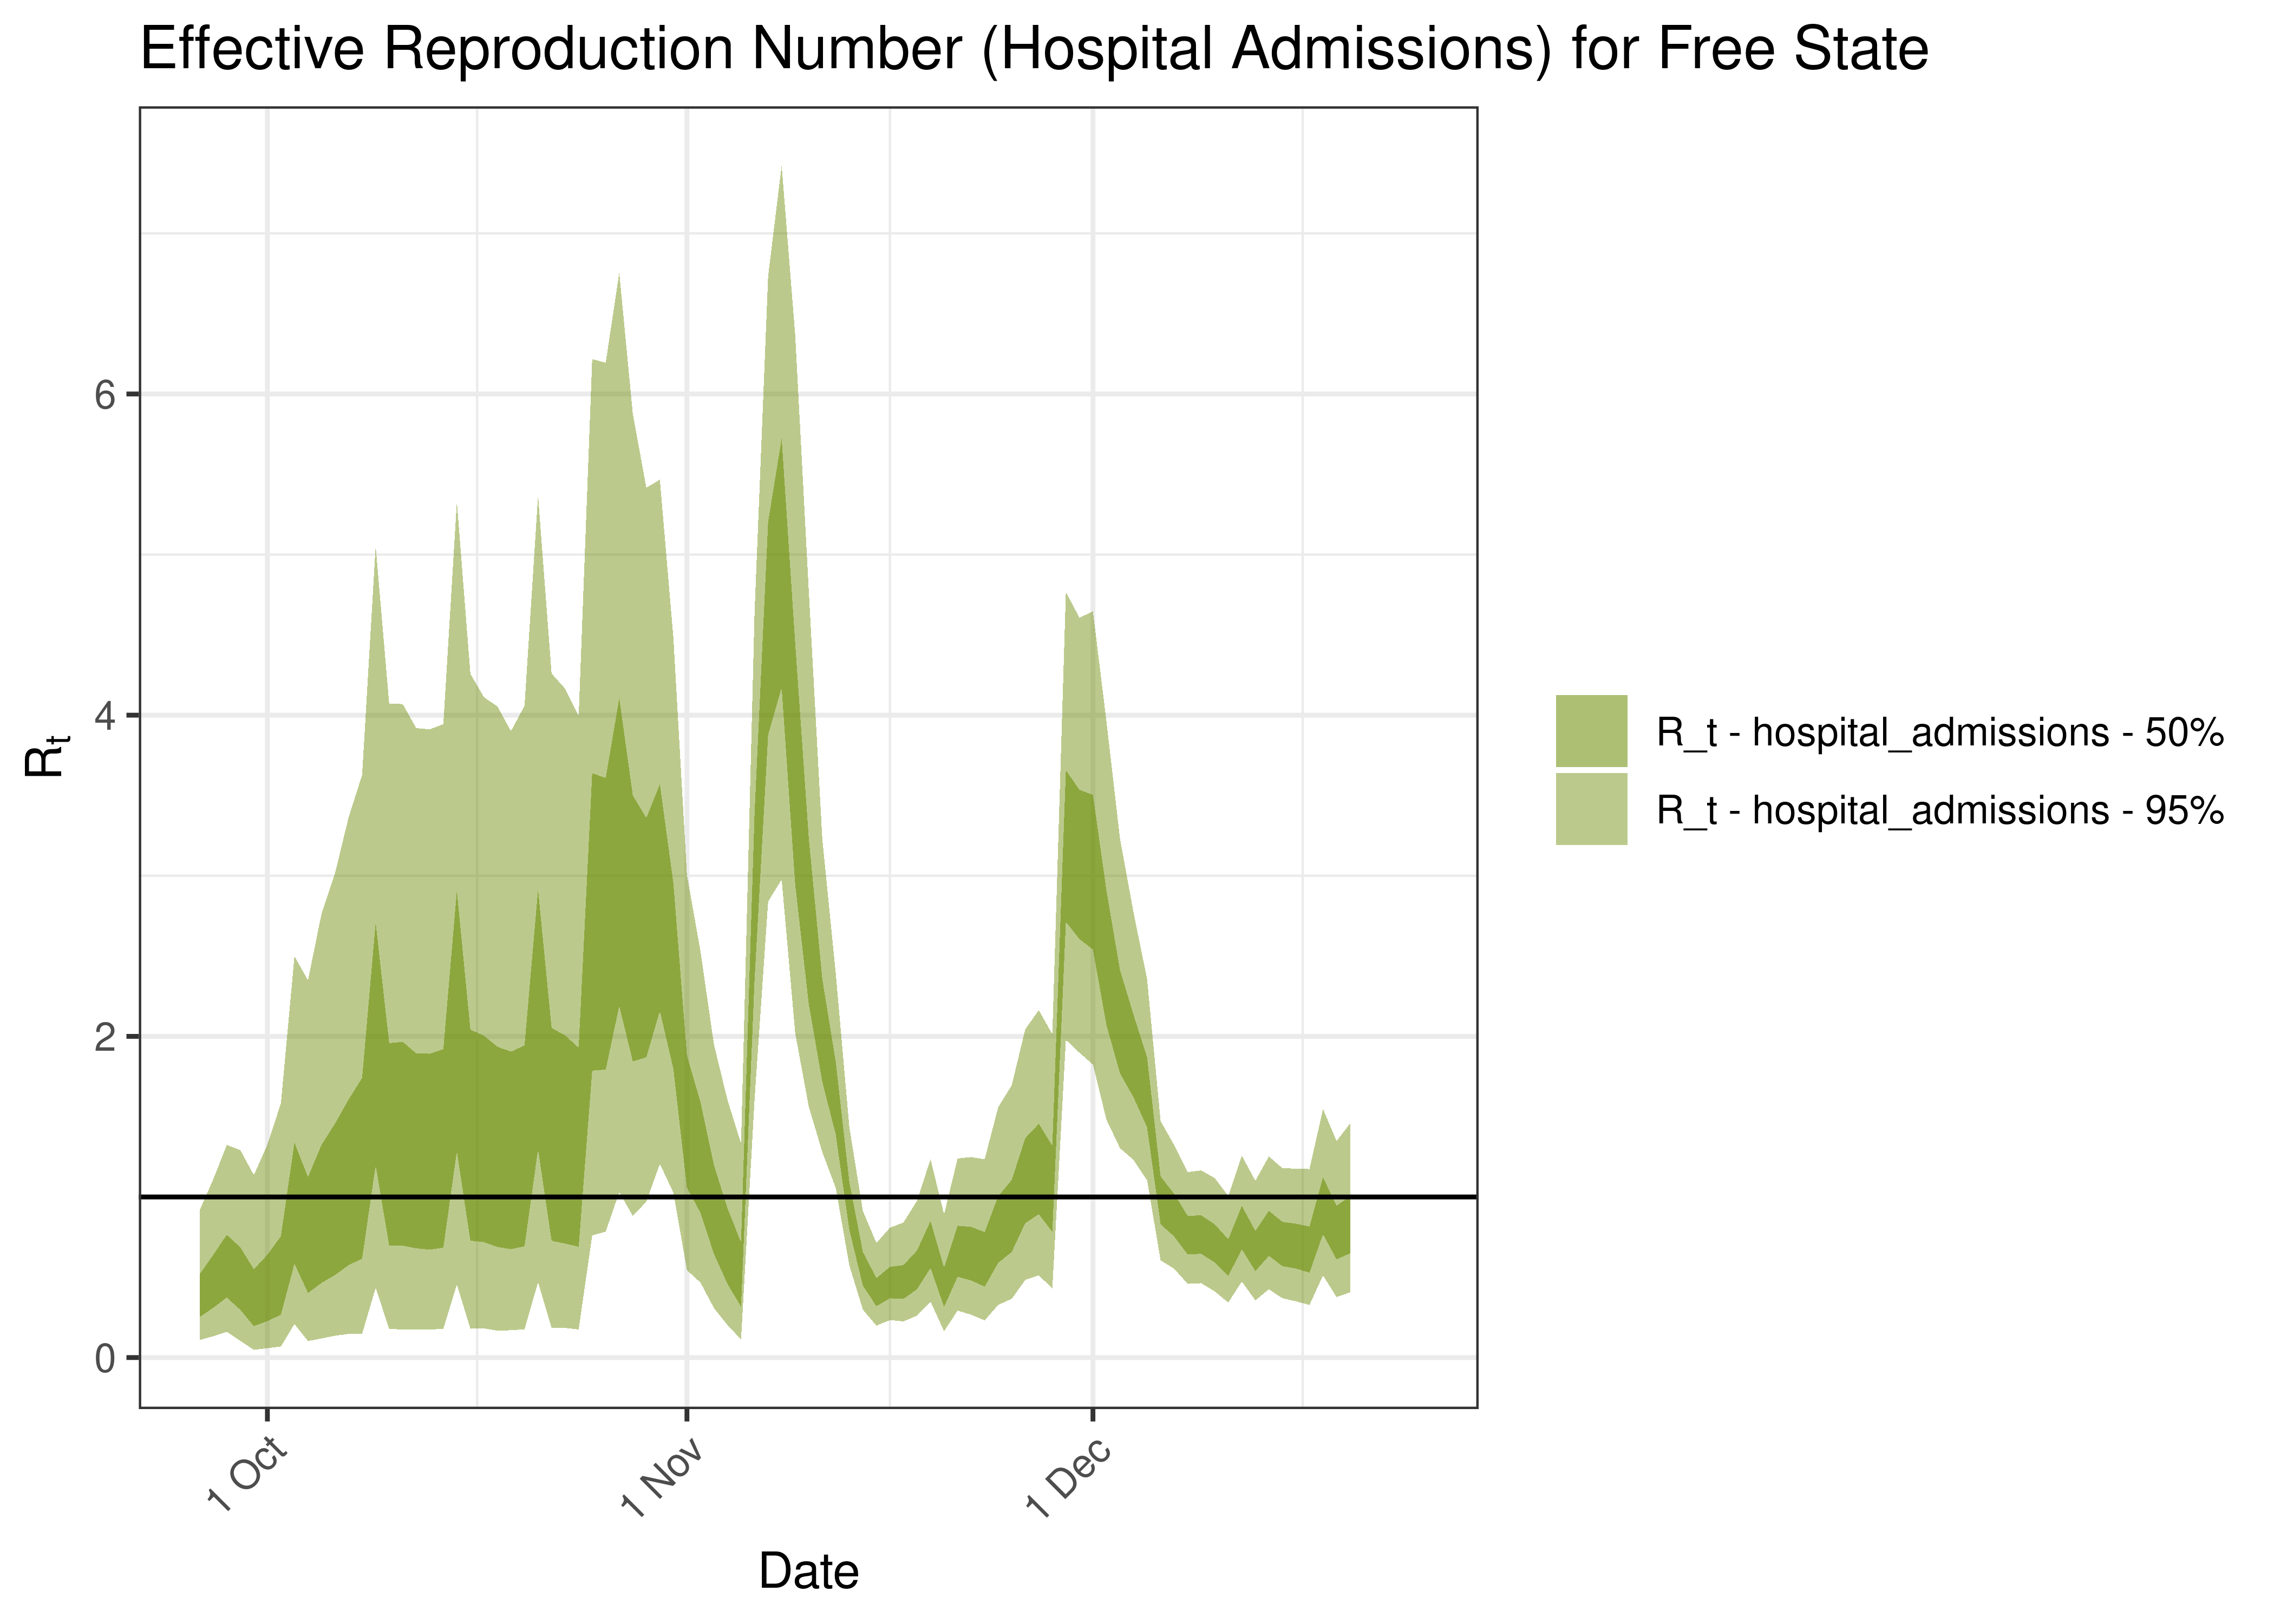 Estimated Effective Reproduction Number Based on Hospital Admissions for Free State over last 90 days